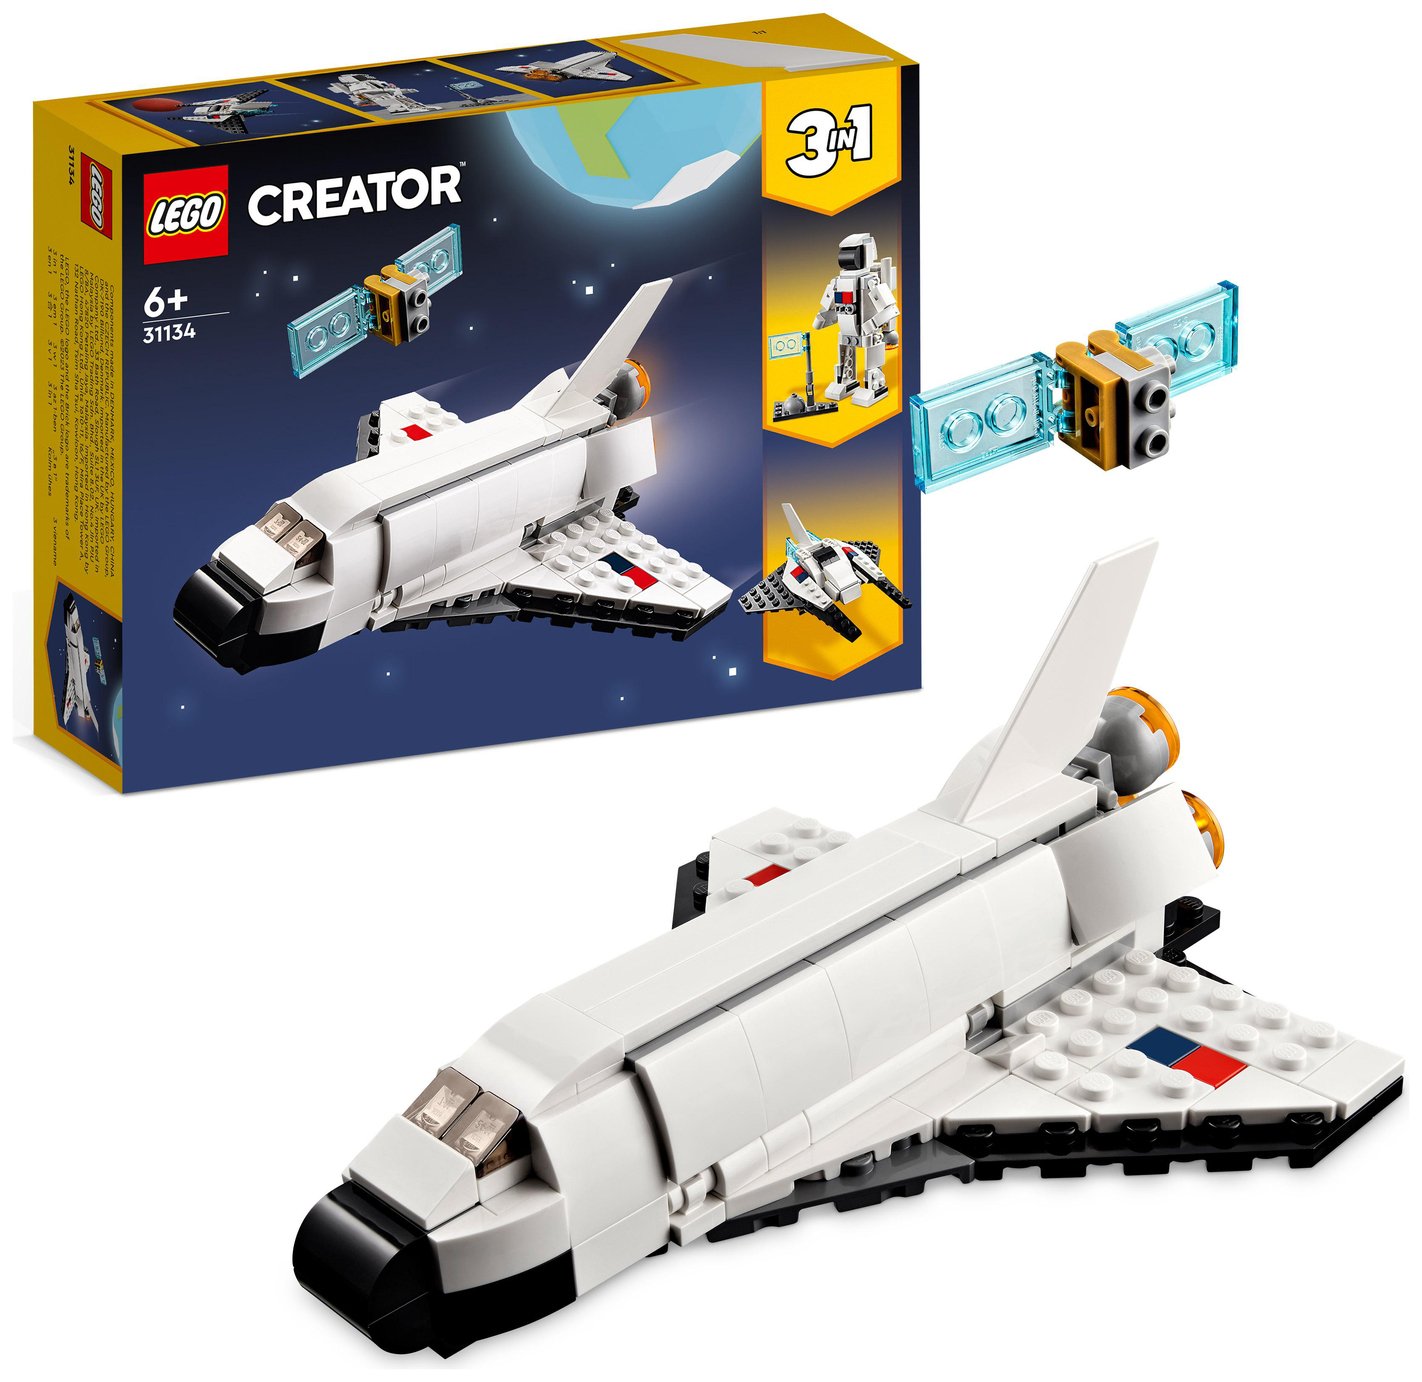 LEGO Creator 3 in 1 Space Shuttle & Spaceship Toys 31134